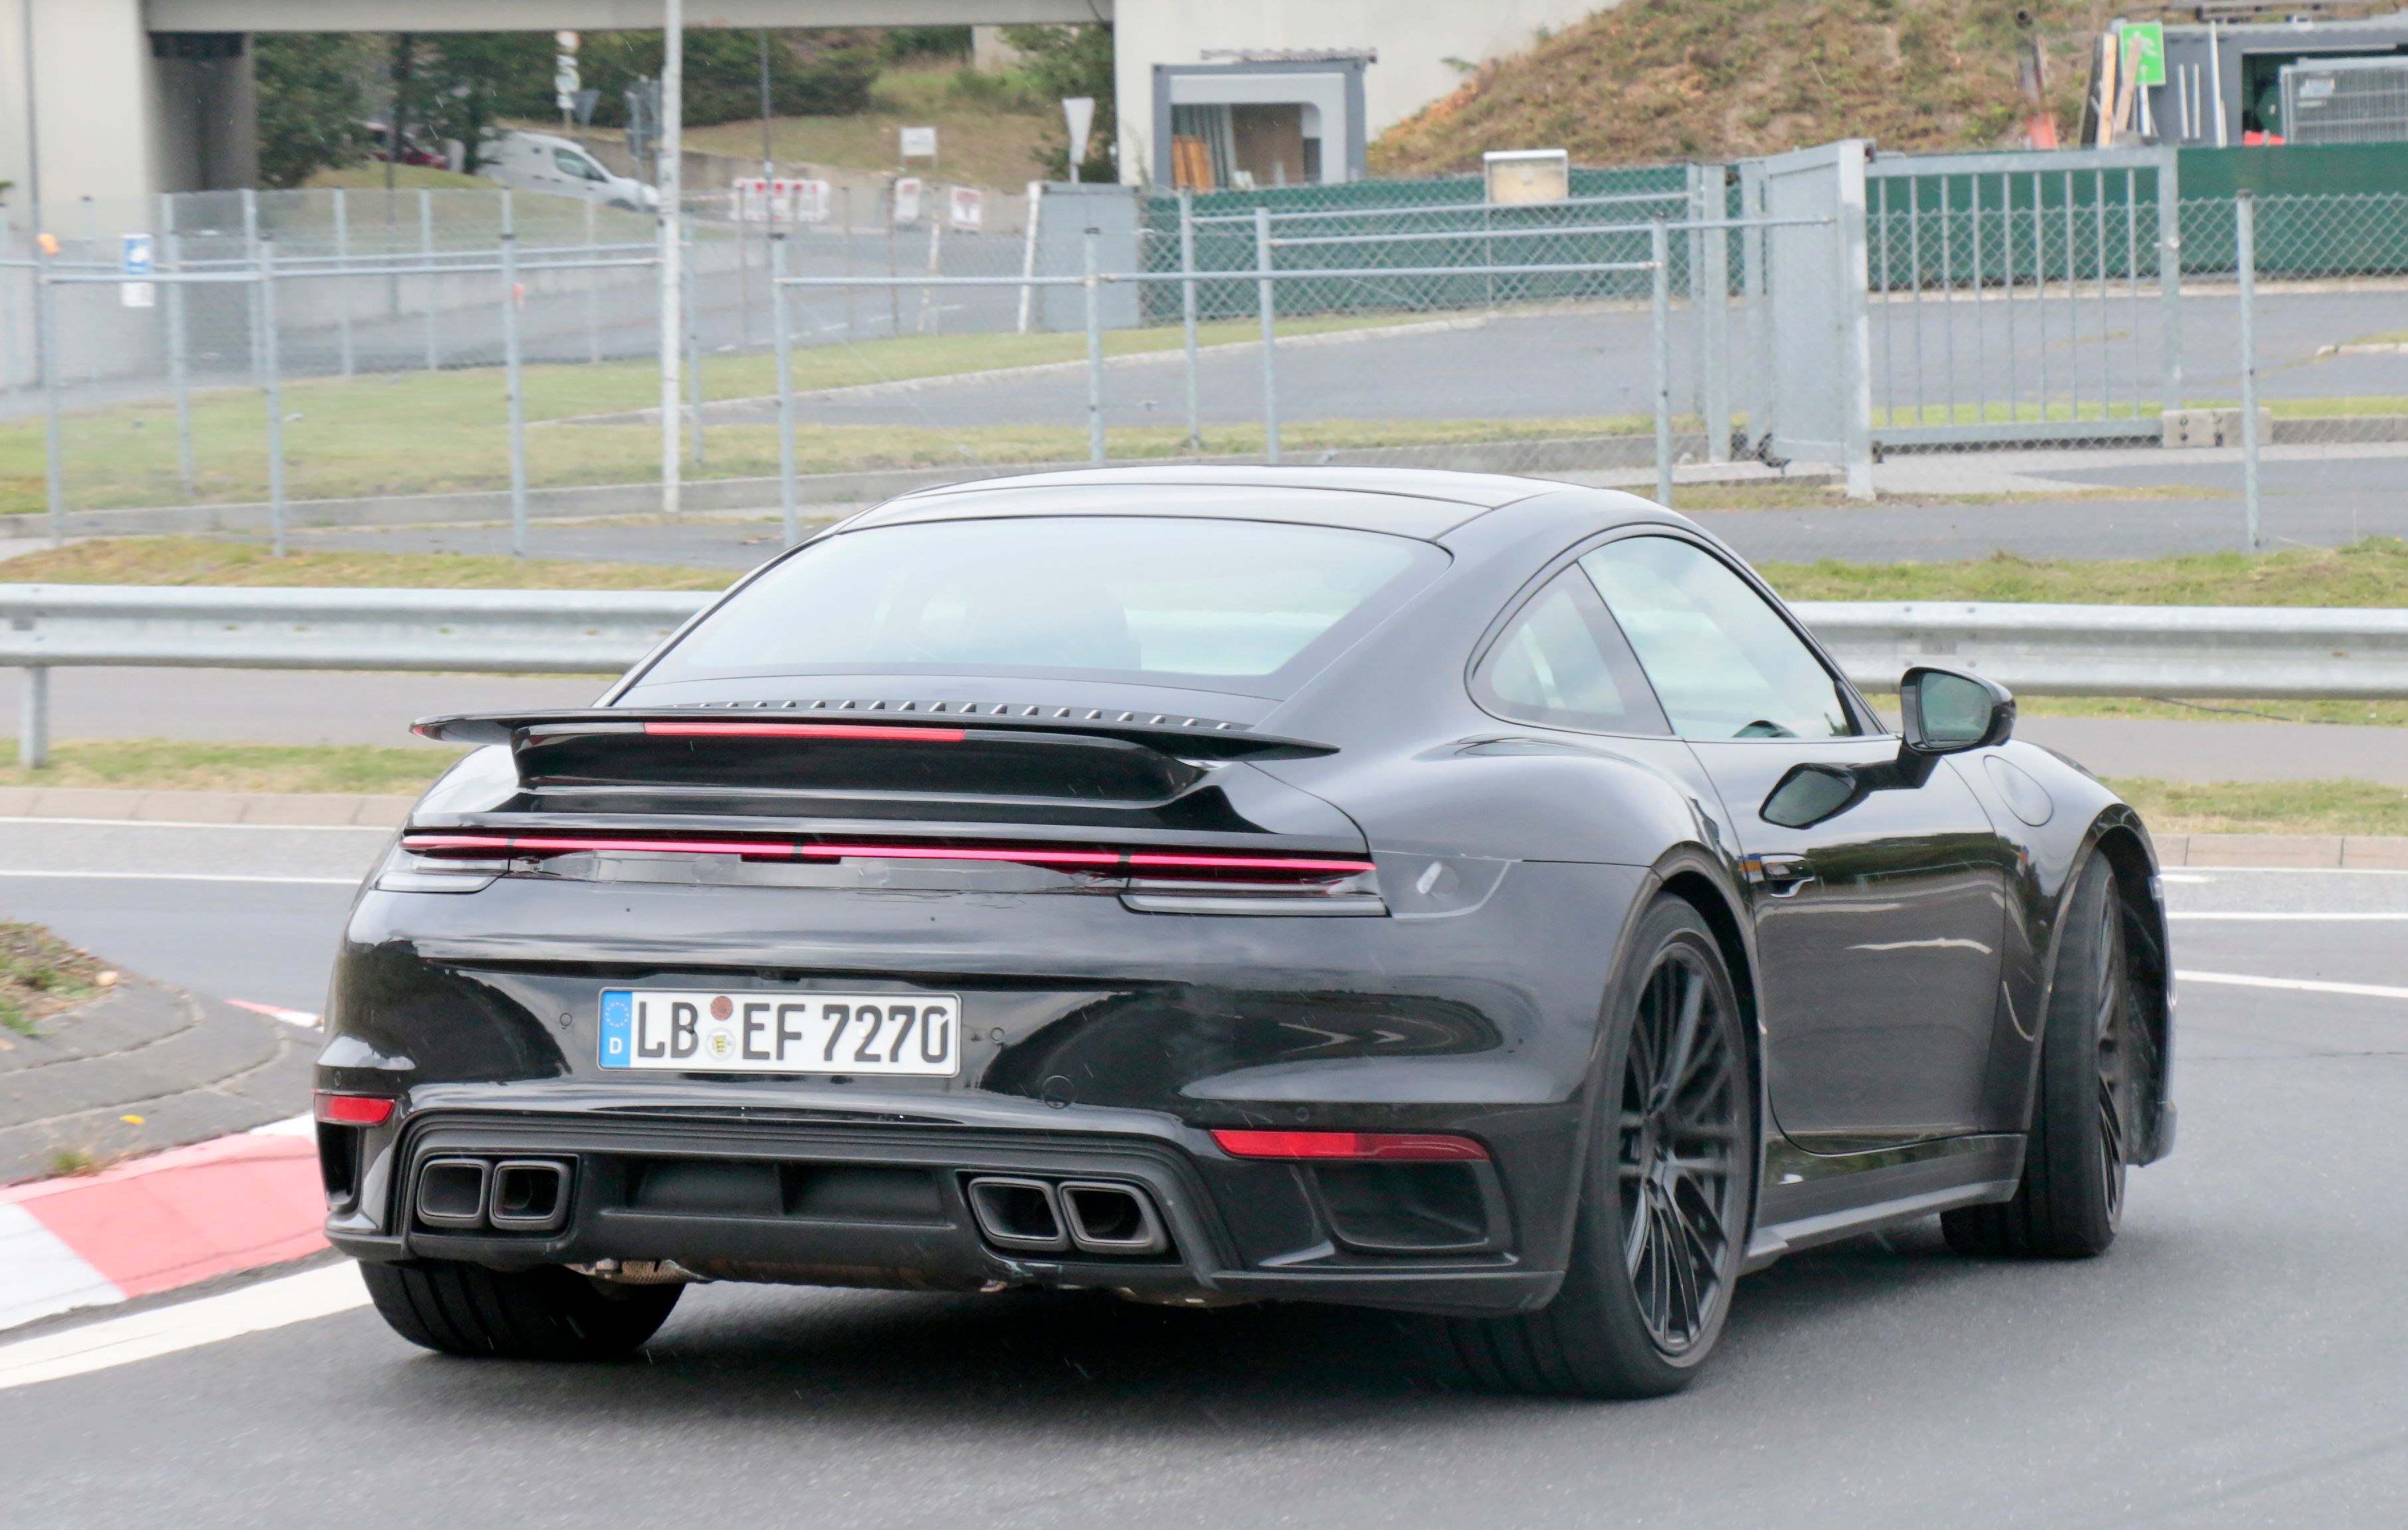 2019 The 2021 Porsche 911 Turbo S Gets a Big Bump in Power and Weight, But What Does it Mean?